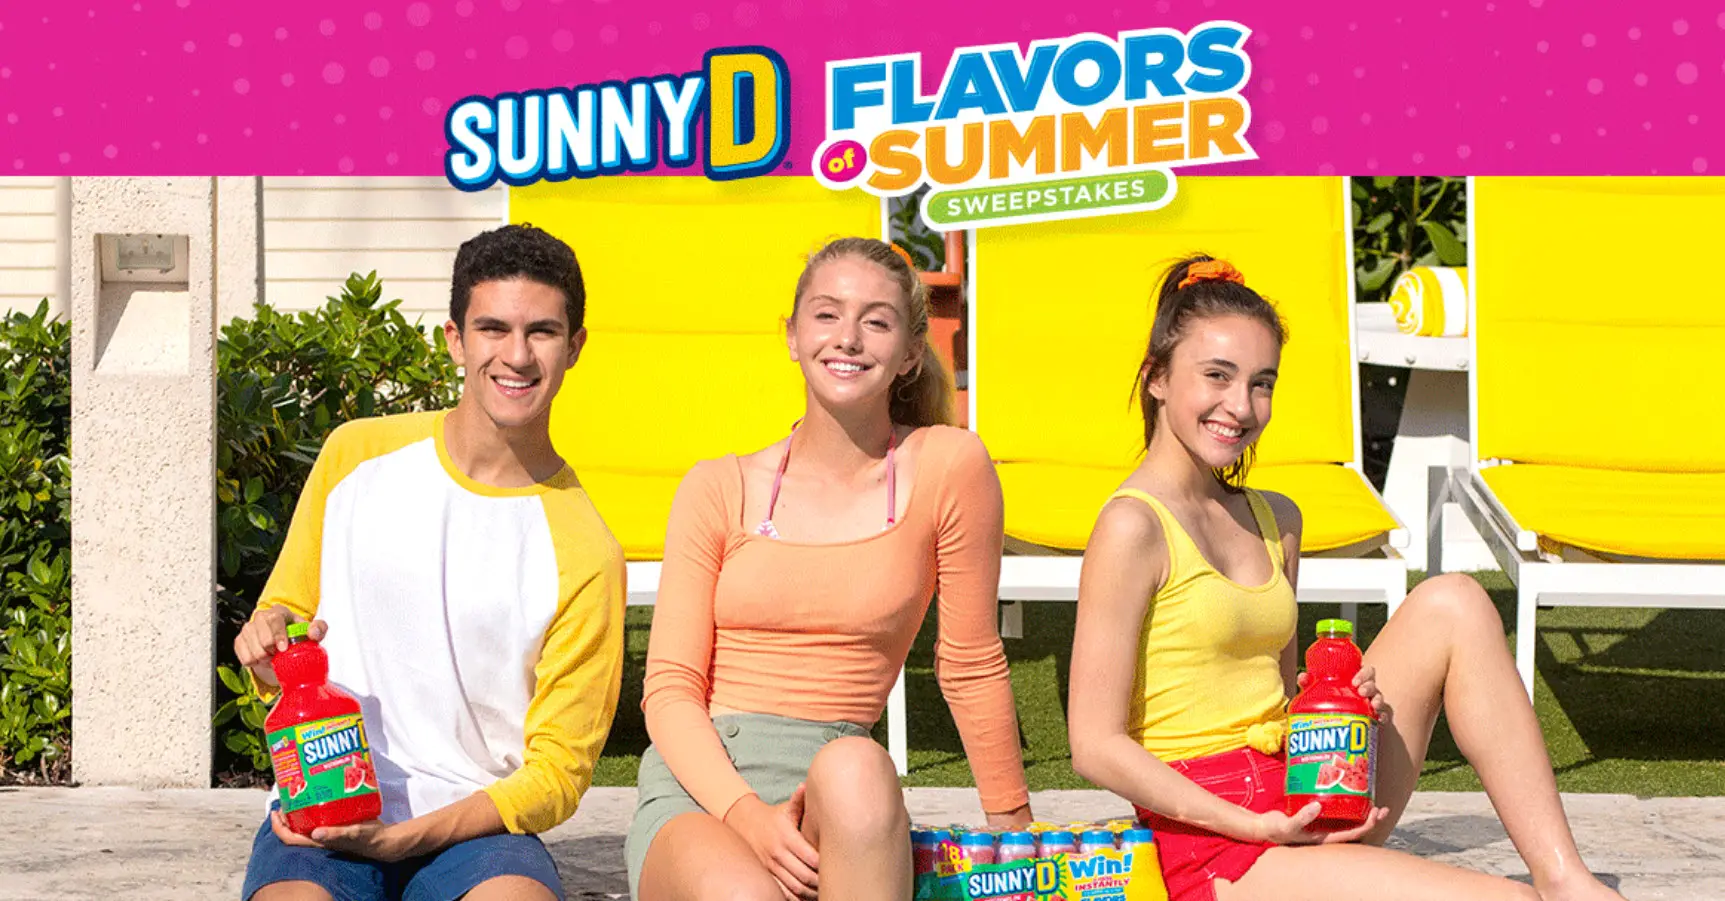 SUNNYD is giving away over 102,000 prizes in the SUNNYD Flavors of Summer Instant Win Game. Grab your SUNNYD game code and play each day for your chance to win free SUNNYD coupons, wireless headphones, sunglasses, $50 gift cards, t-shirts, drawstring bags, and you also will be entered for our chance to win $5,000 in cash!